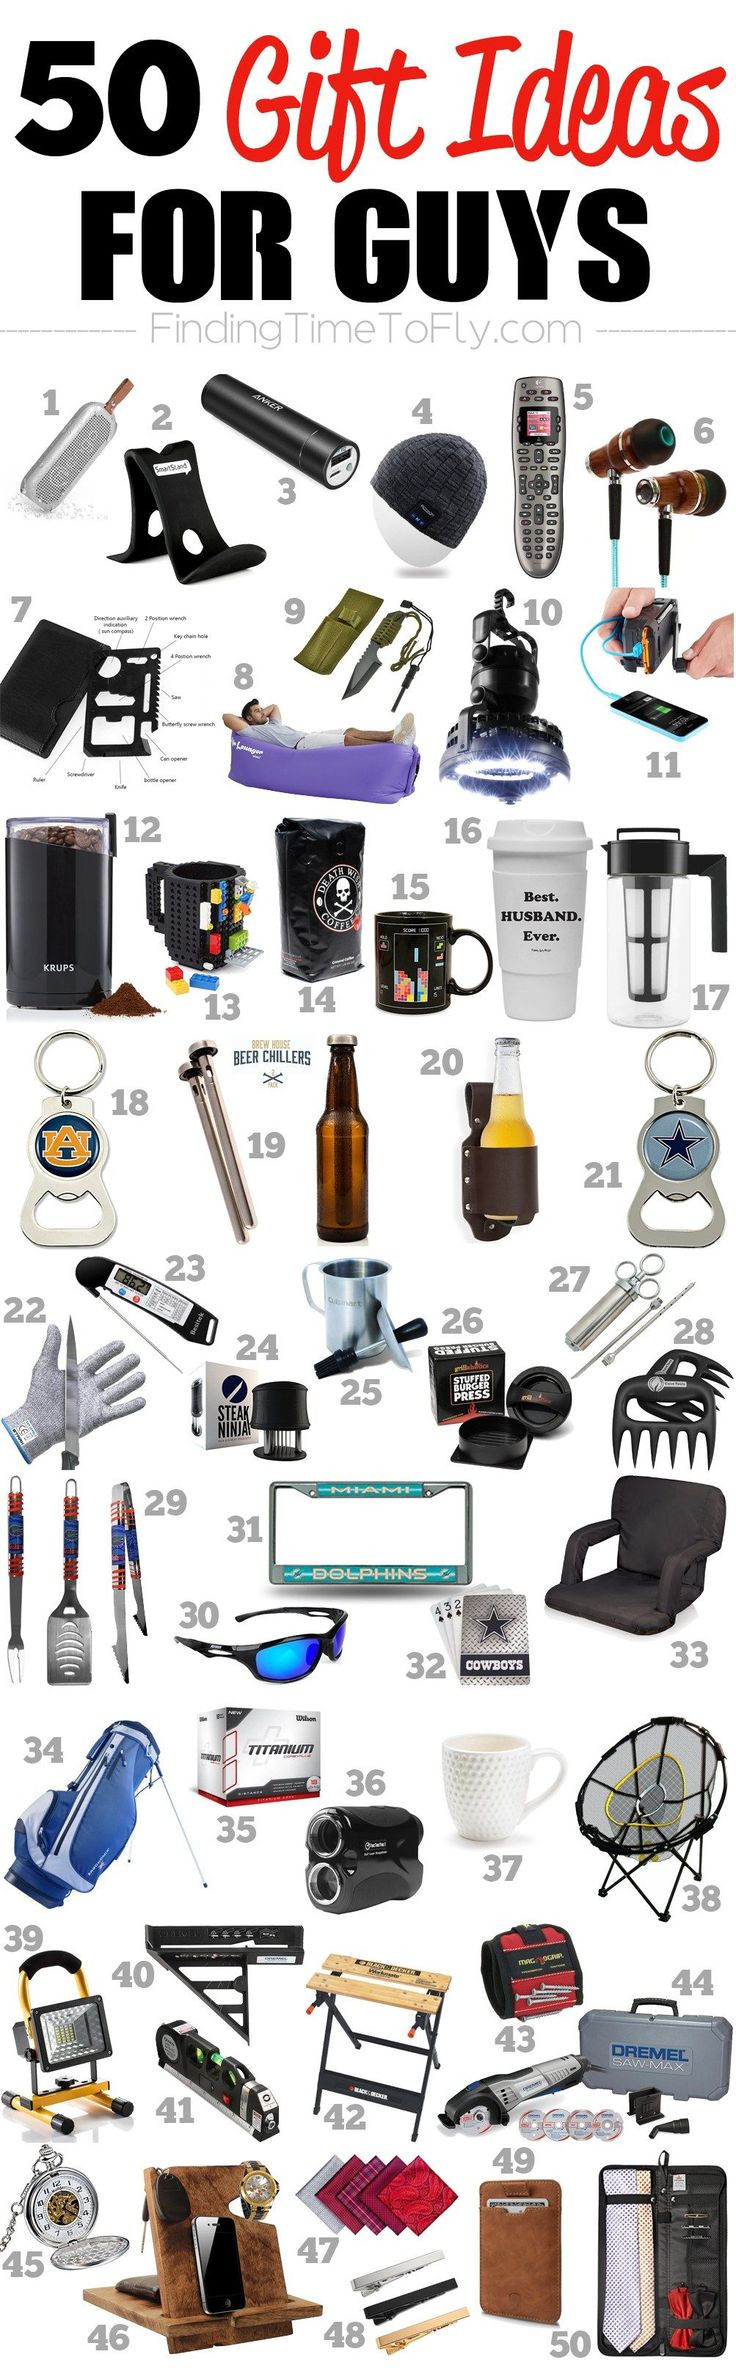 Gift Ideas For Men Birthday
 418 best College Student Gift Ideas images on Pinterest